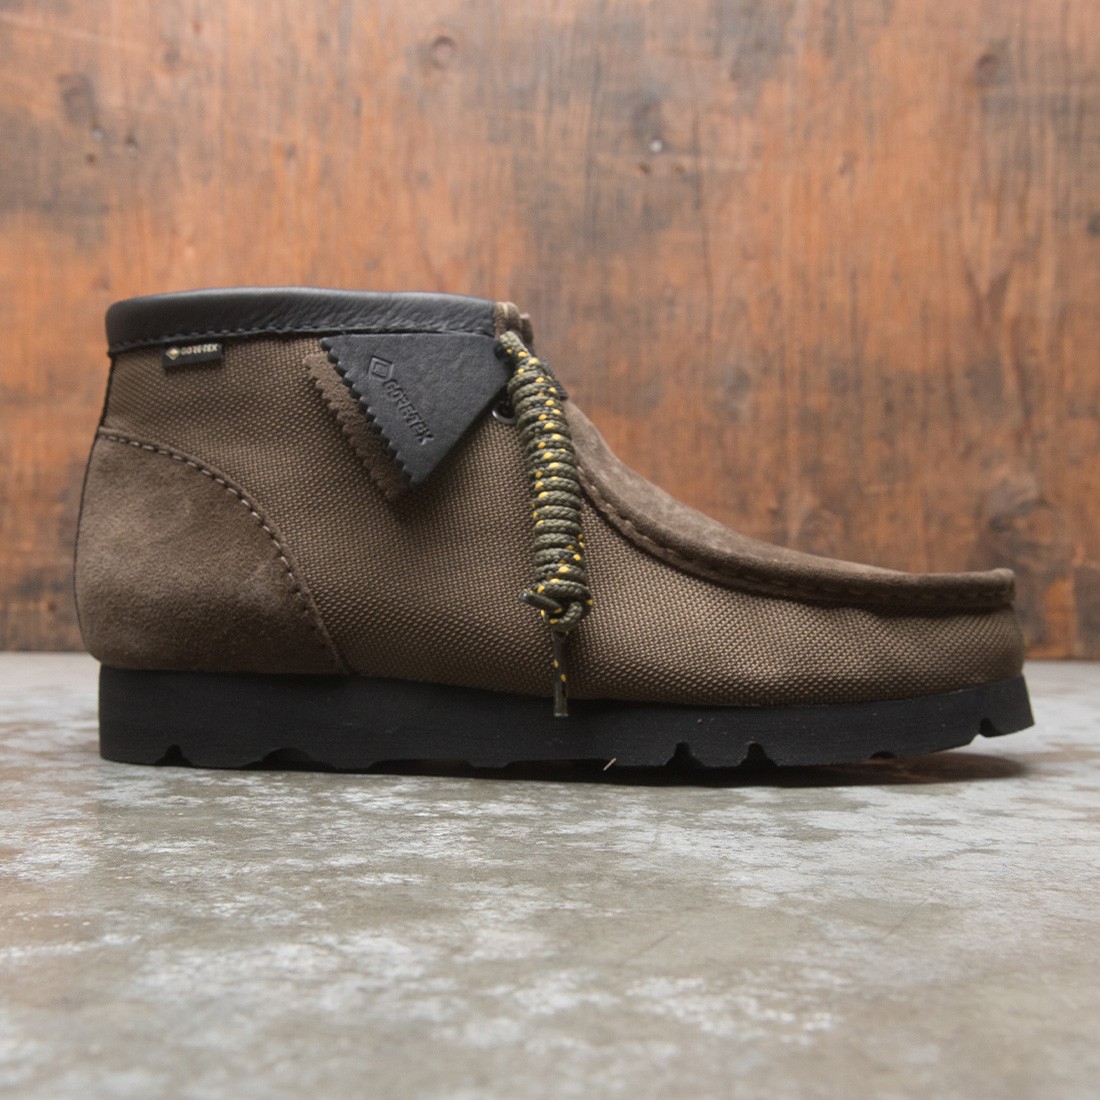 olive green clarks wallabees